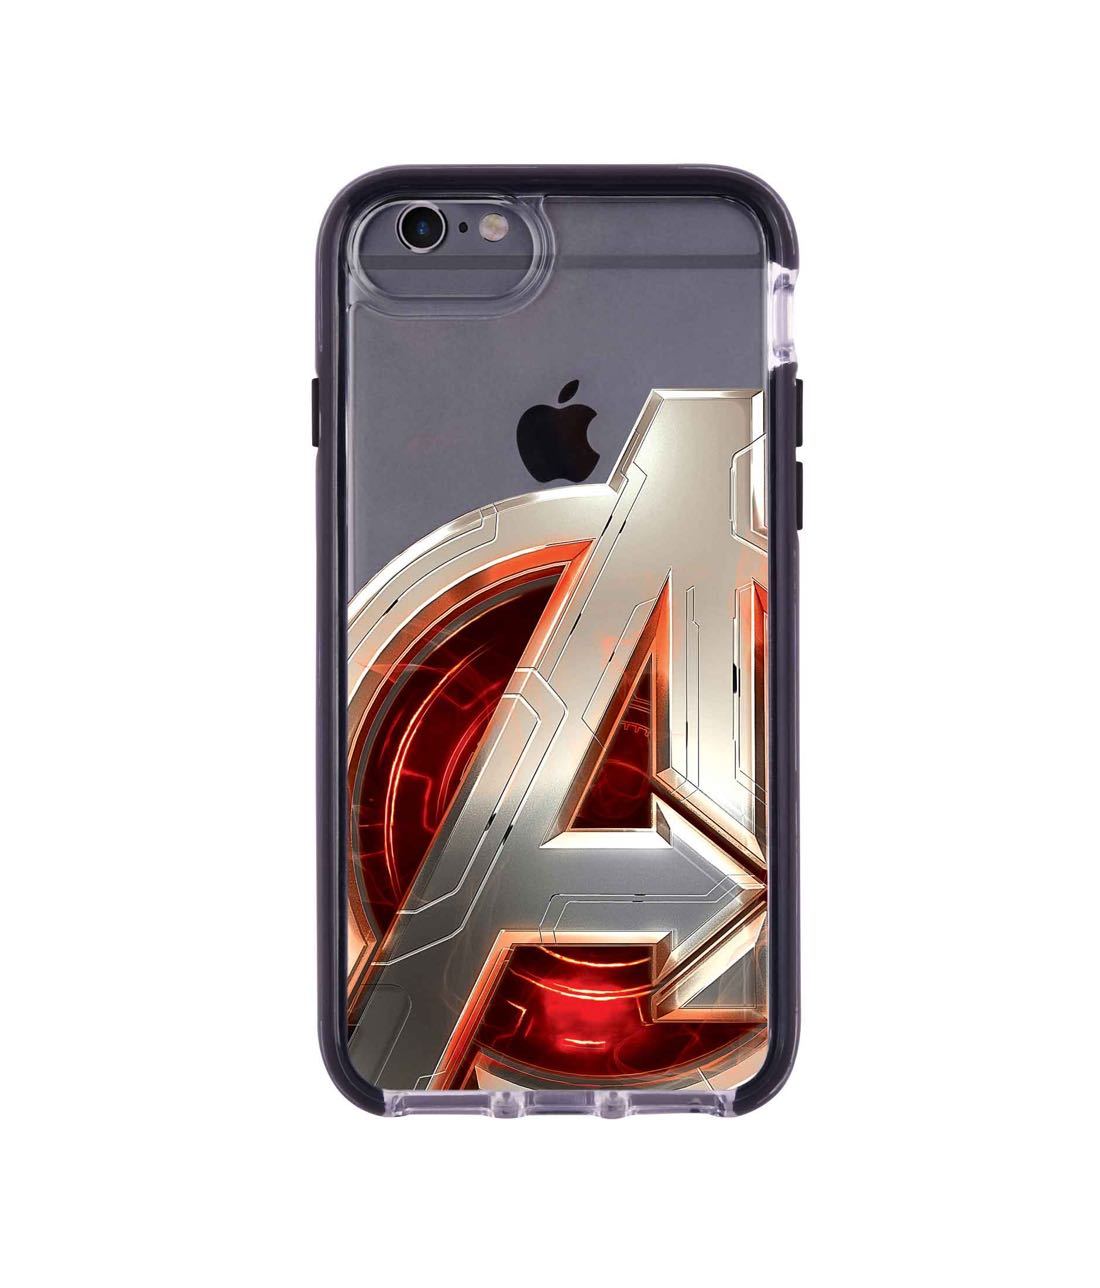 Avengers Version 2 - Extreme Phone Case for iPhone 6S Plus